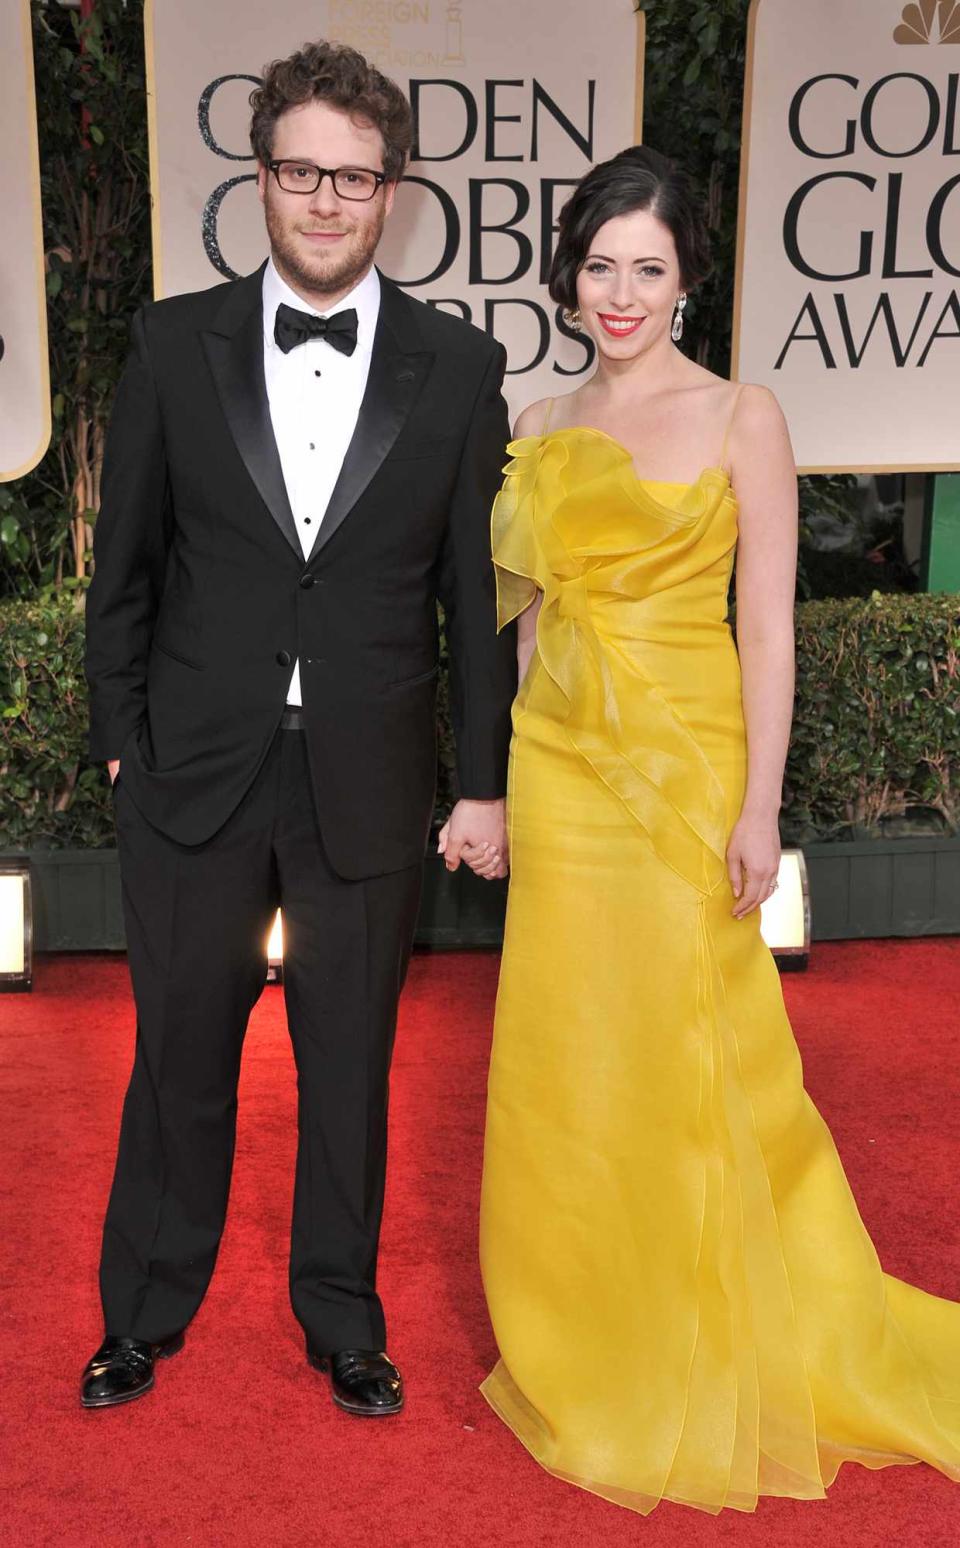 Seth Rogen and wife Lauren Miller arrive at the 69th Annual Golden Globe Awards at The Beverly Hilton hotel on January 15, 2012 in Beverly Hills, California